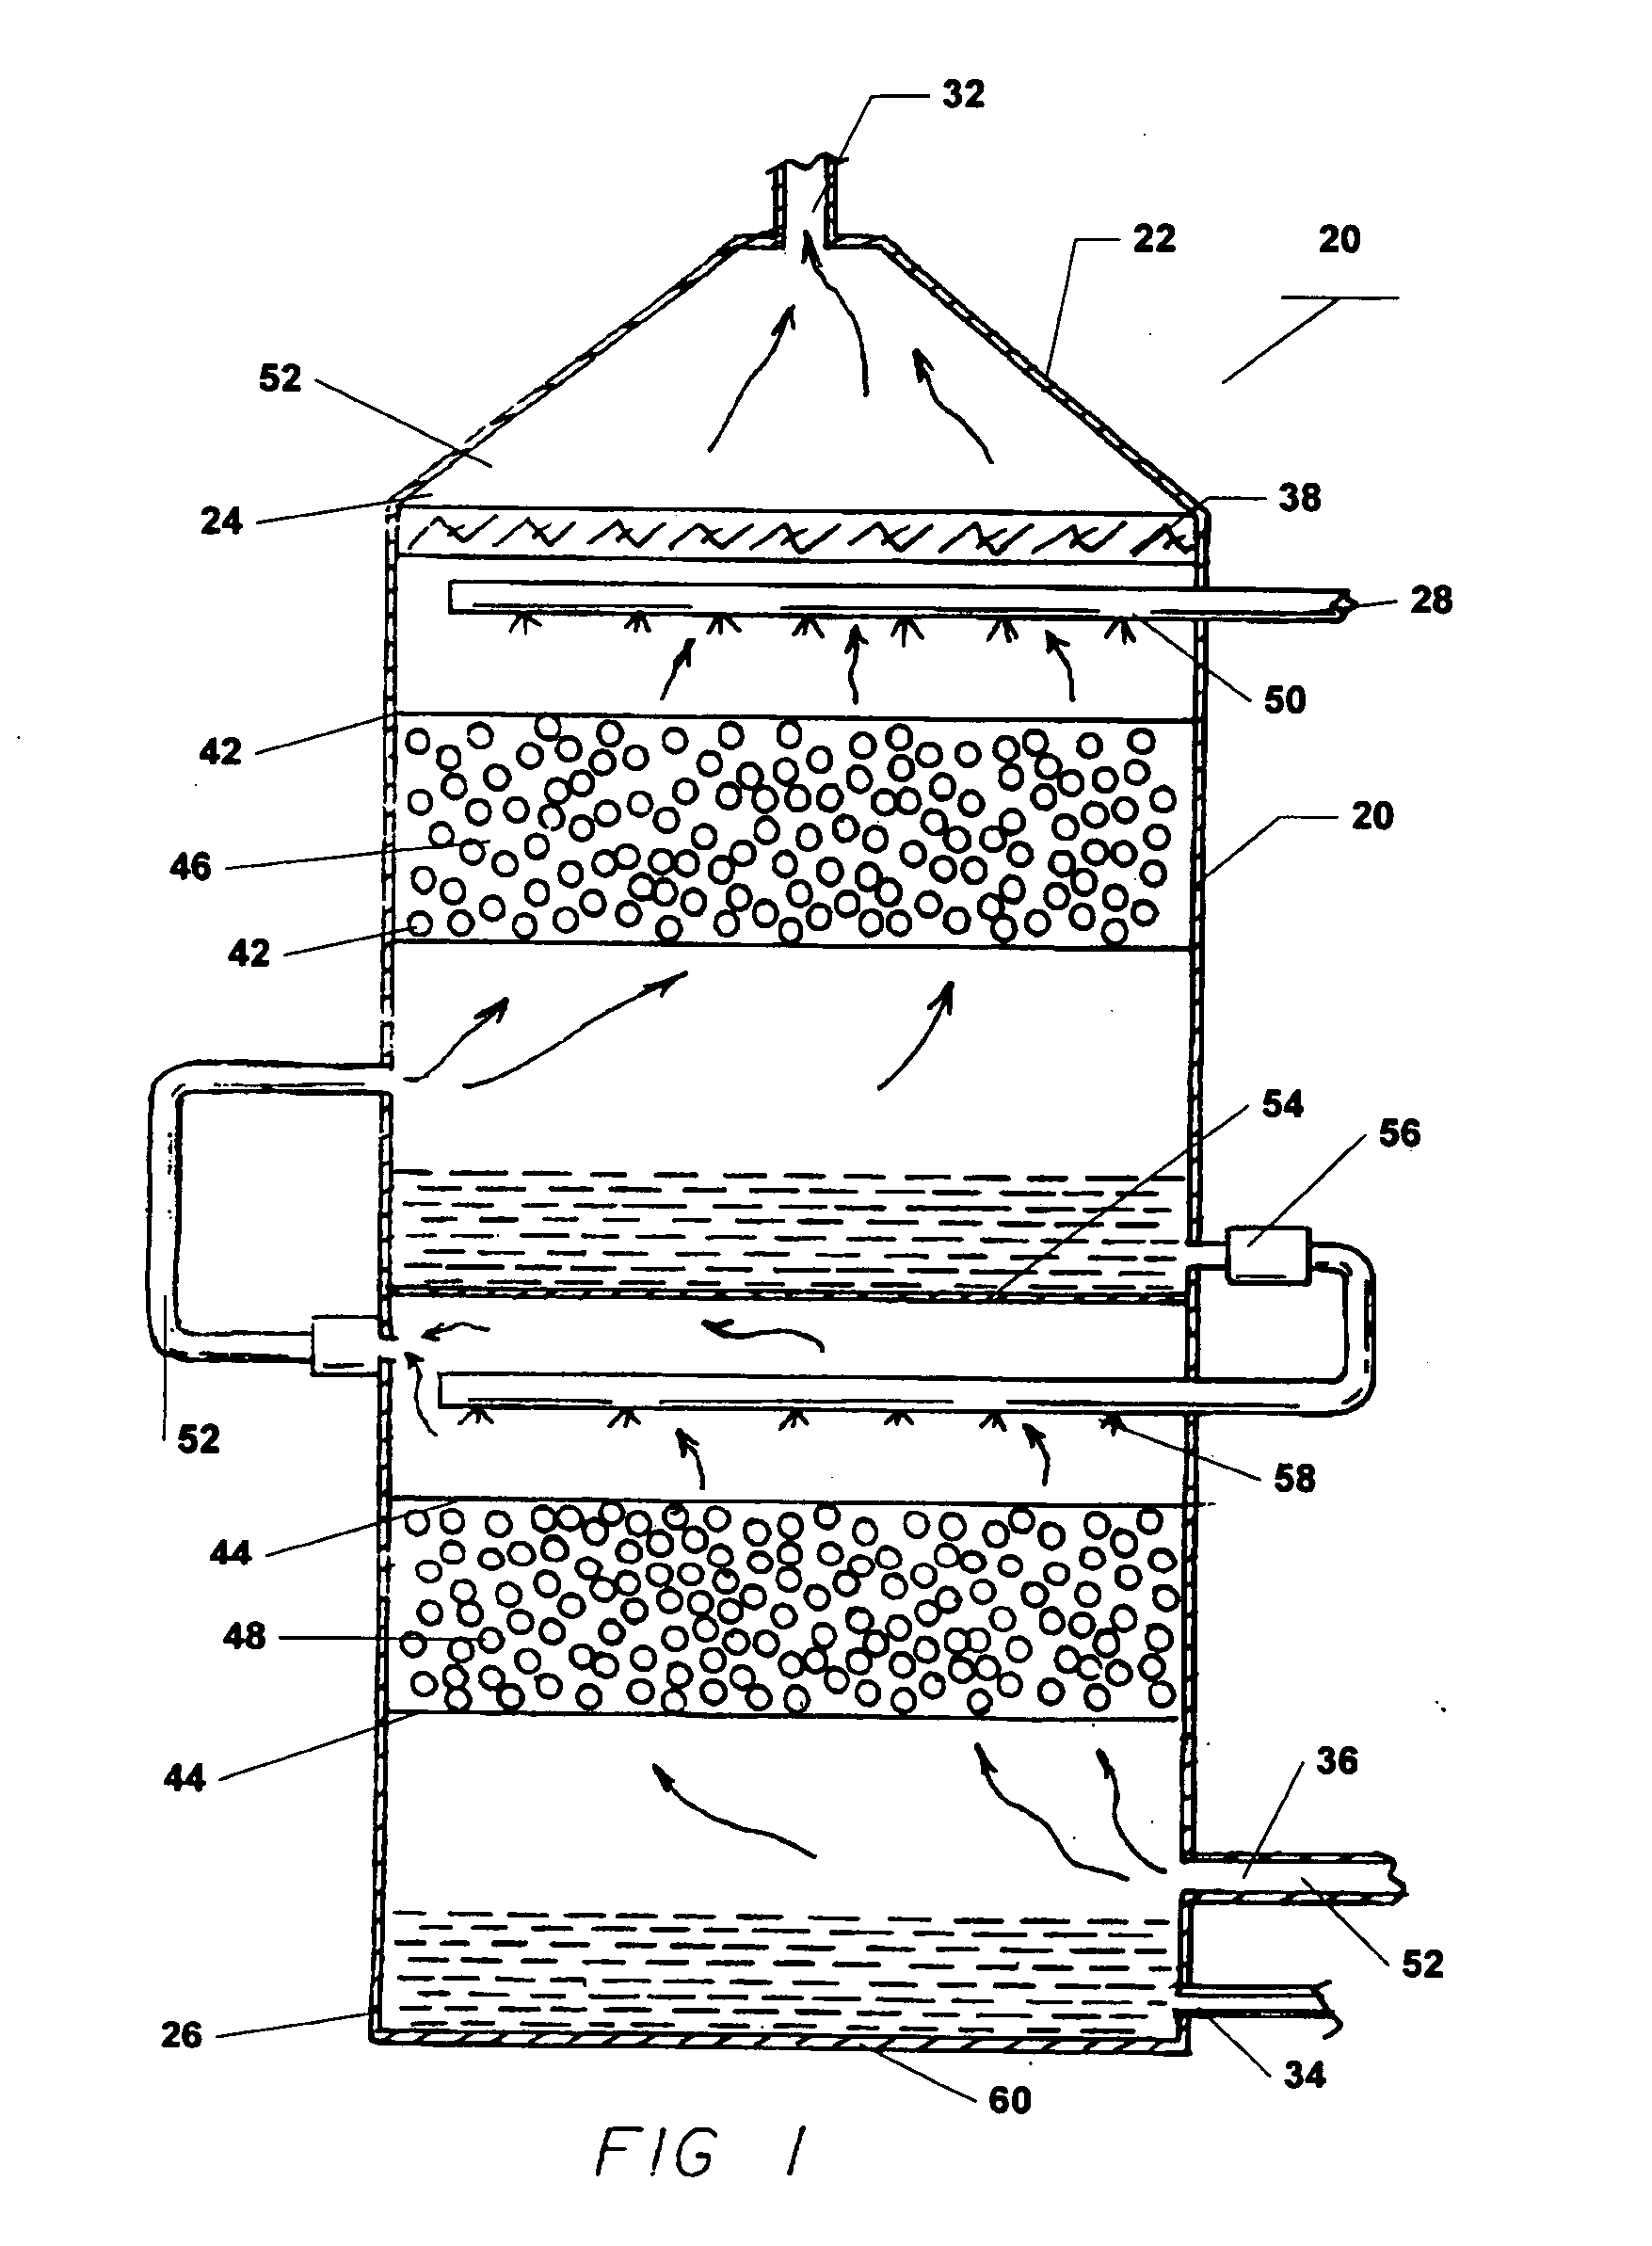 Method and apparatus for high efficiency multi-stage packed tower aeration with PH adjustment and reutilization of outlet air